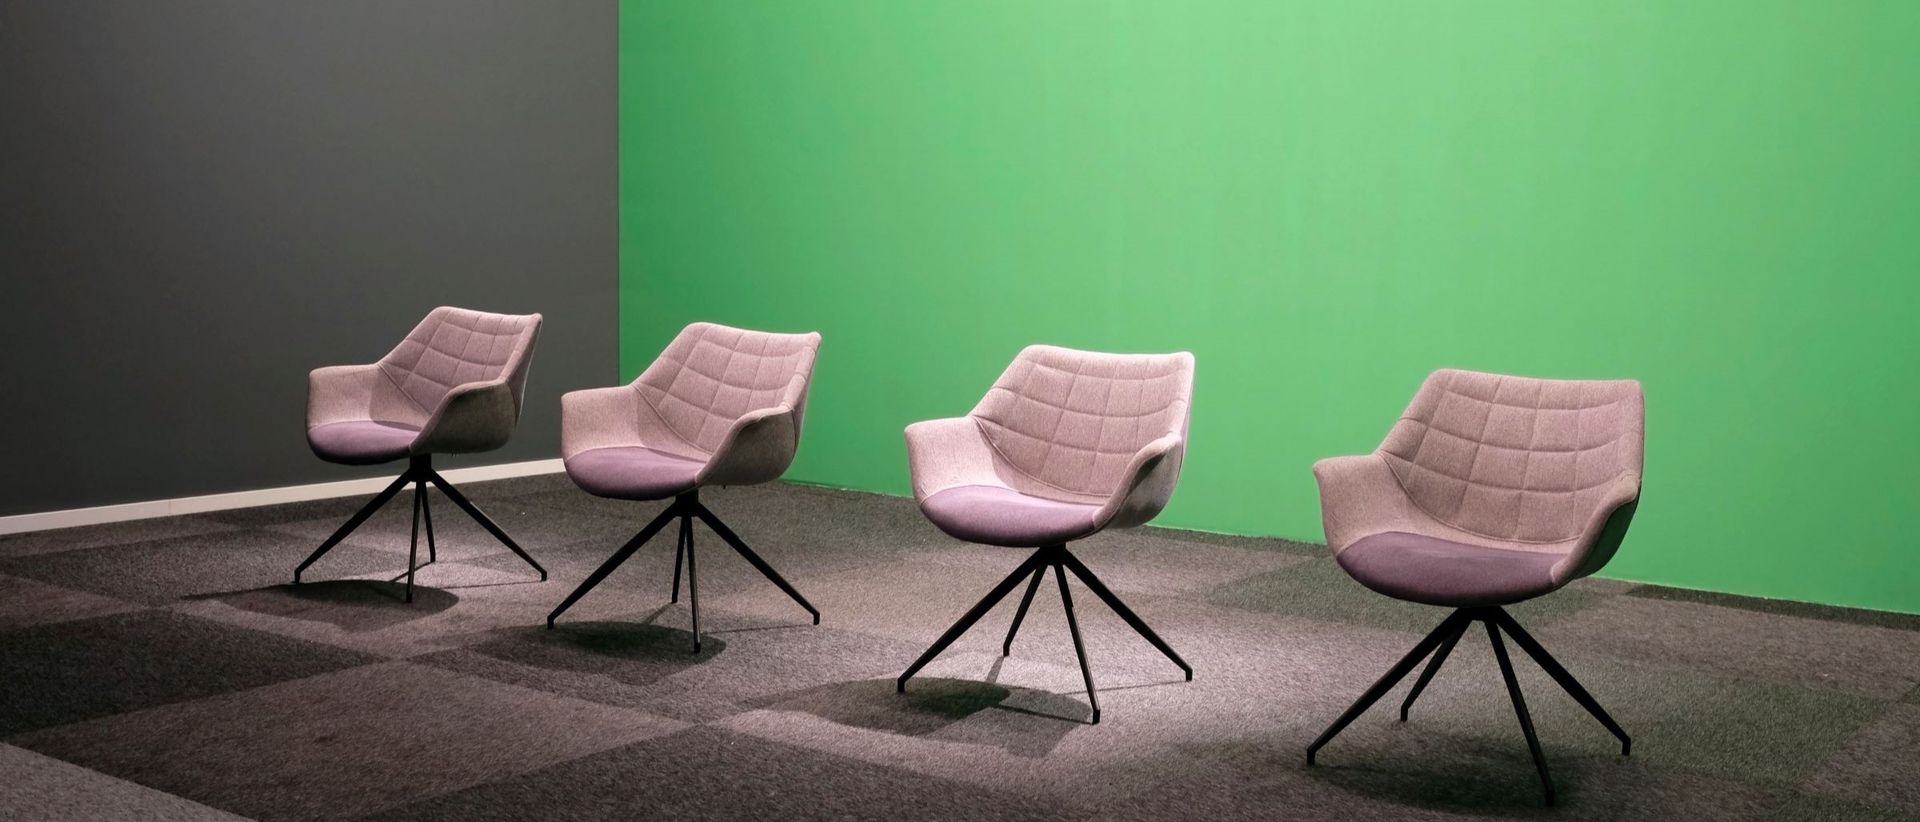 Symbolic image of a panel discussion showing four empty chairs in front of a green background.